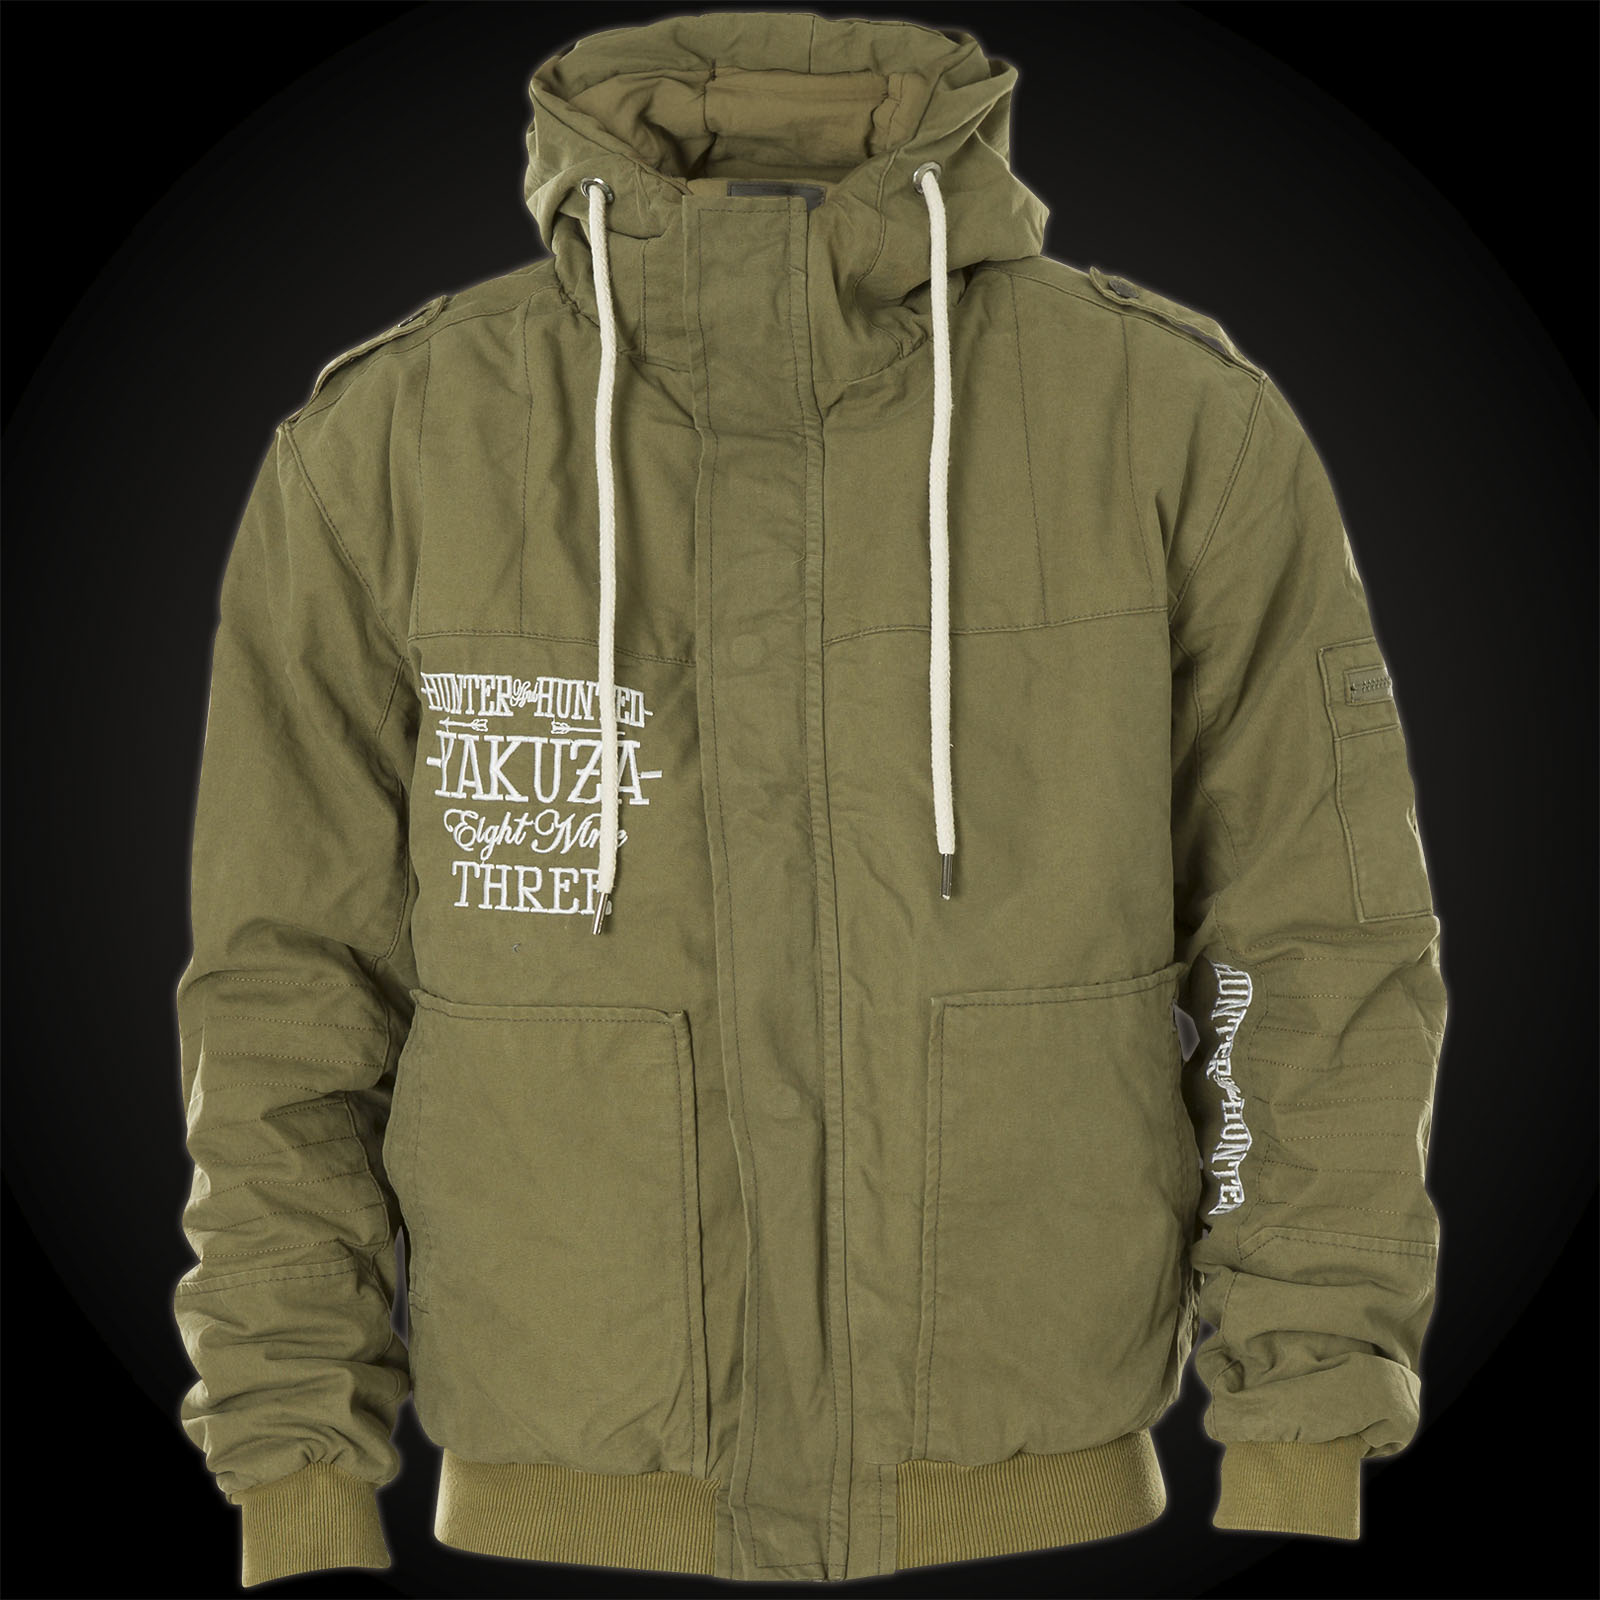 Yakuza Hunter And Hunters Military Jacket with lots of lettering